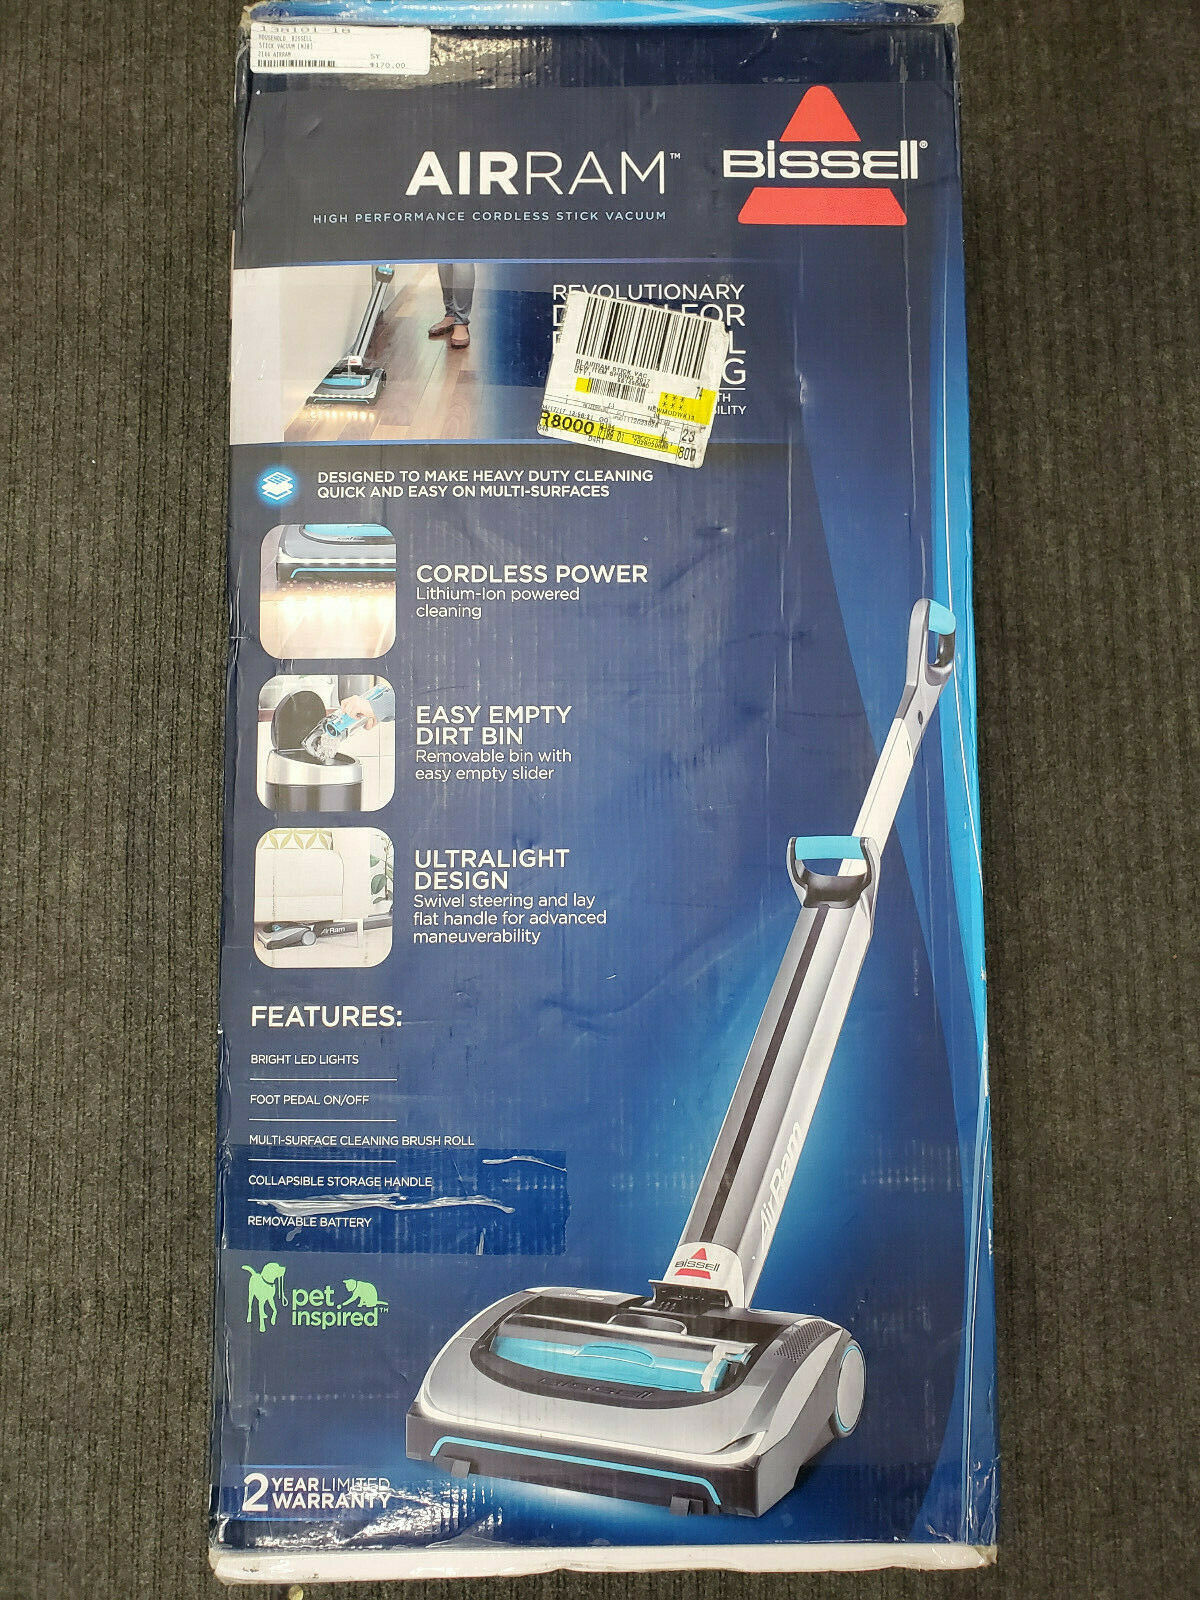 Bissell Airram Cordless Upright Vacuum User Manual